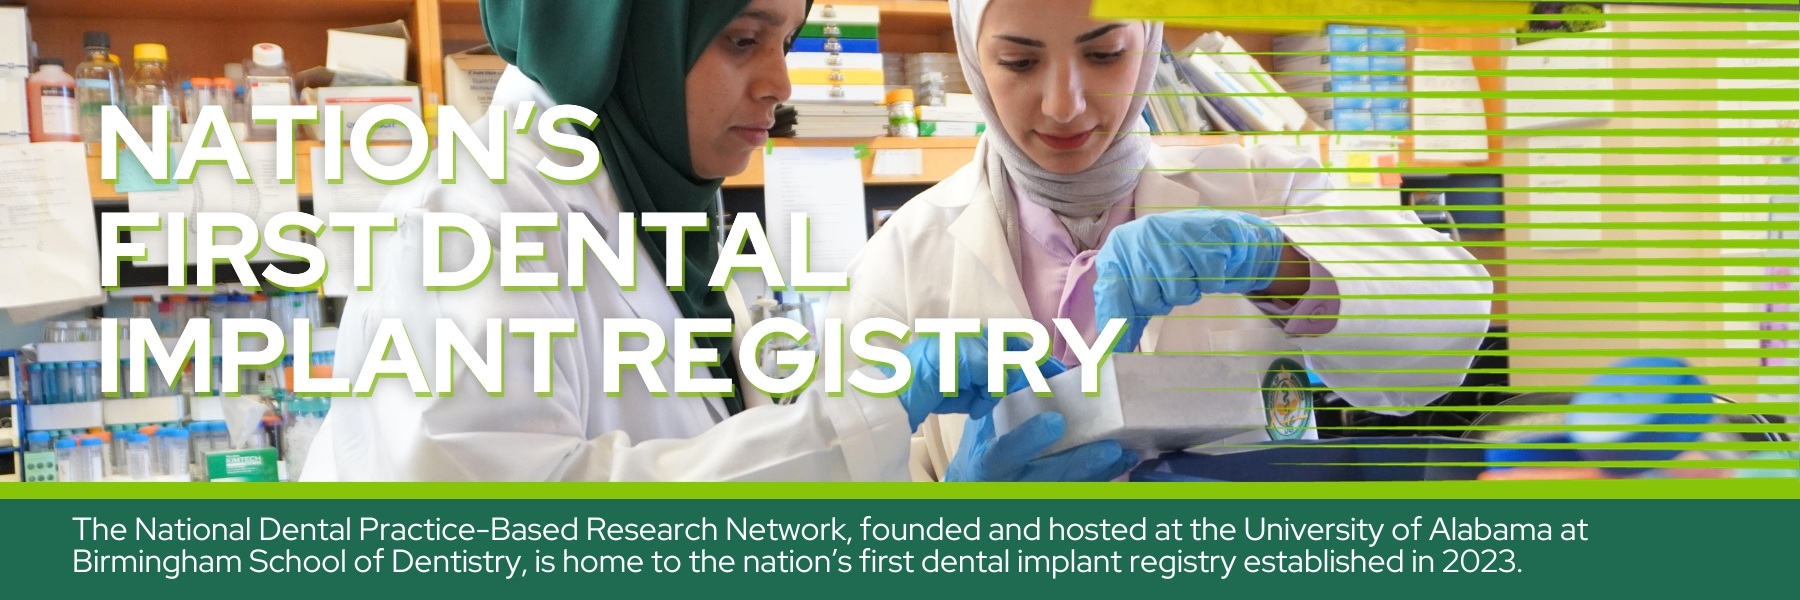 Nation’s  First Dental Implant Registry - The National Dental Practice-Based Research Network, founded and hosted at the University of Alabama at Birmingham School of Dentistry, is home to the nation’s first dental implant registry established in 2023.